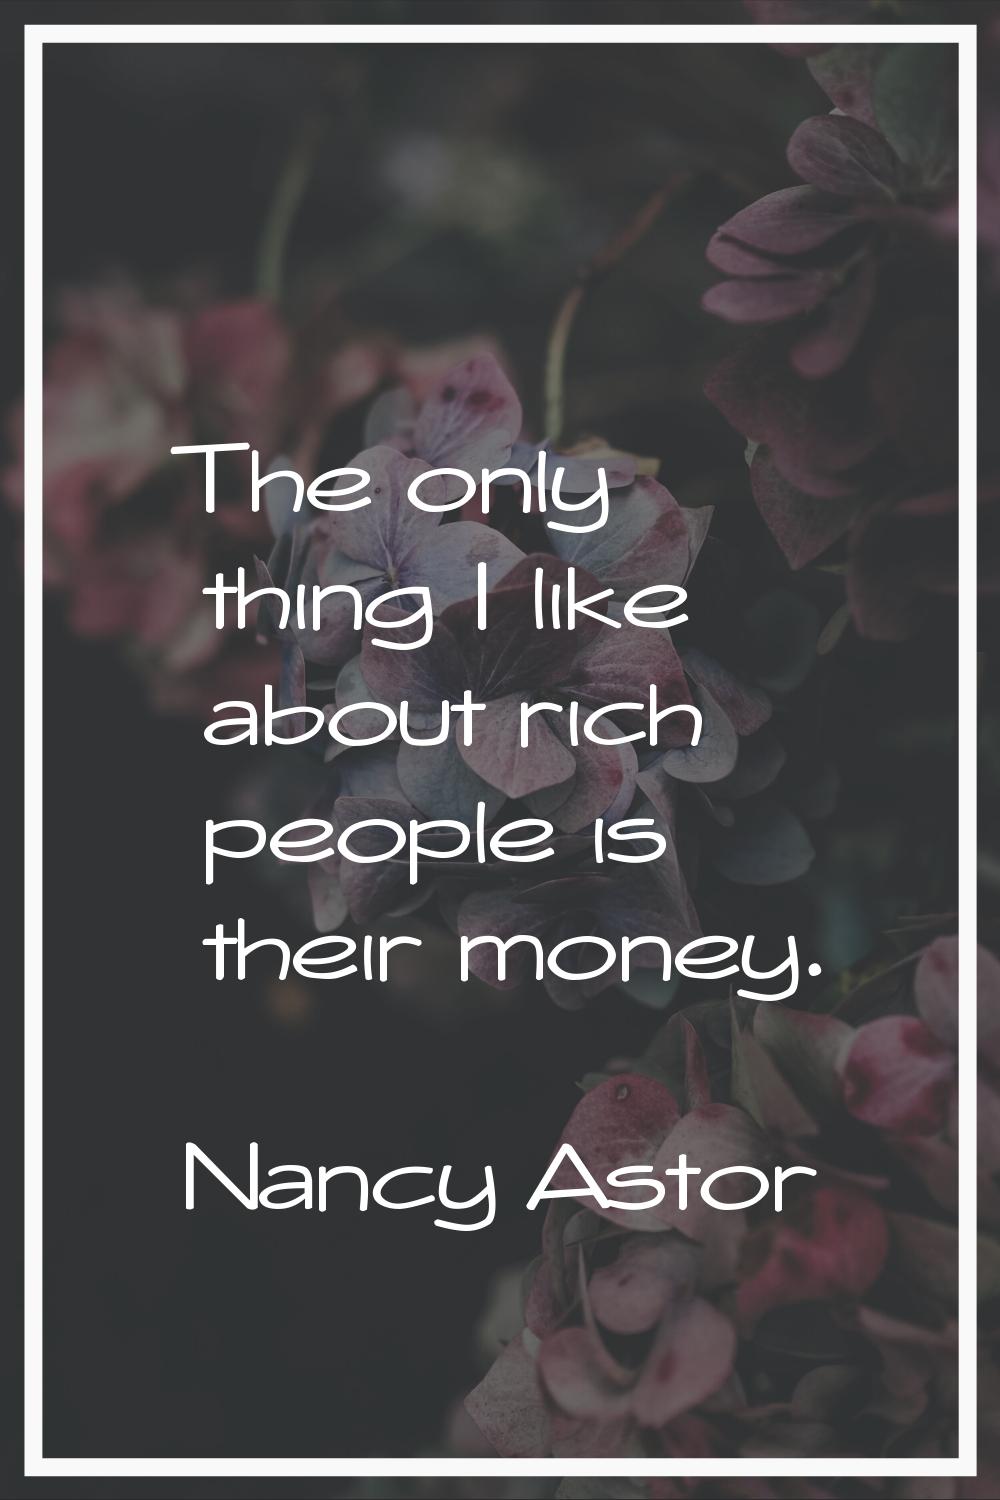 The only thing I like about rich people is their money.